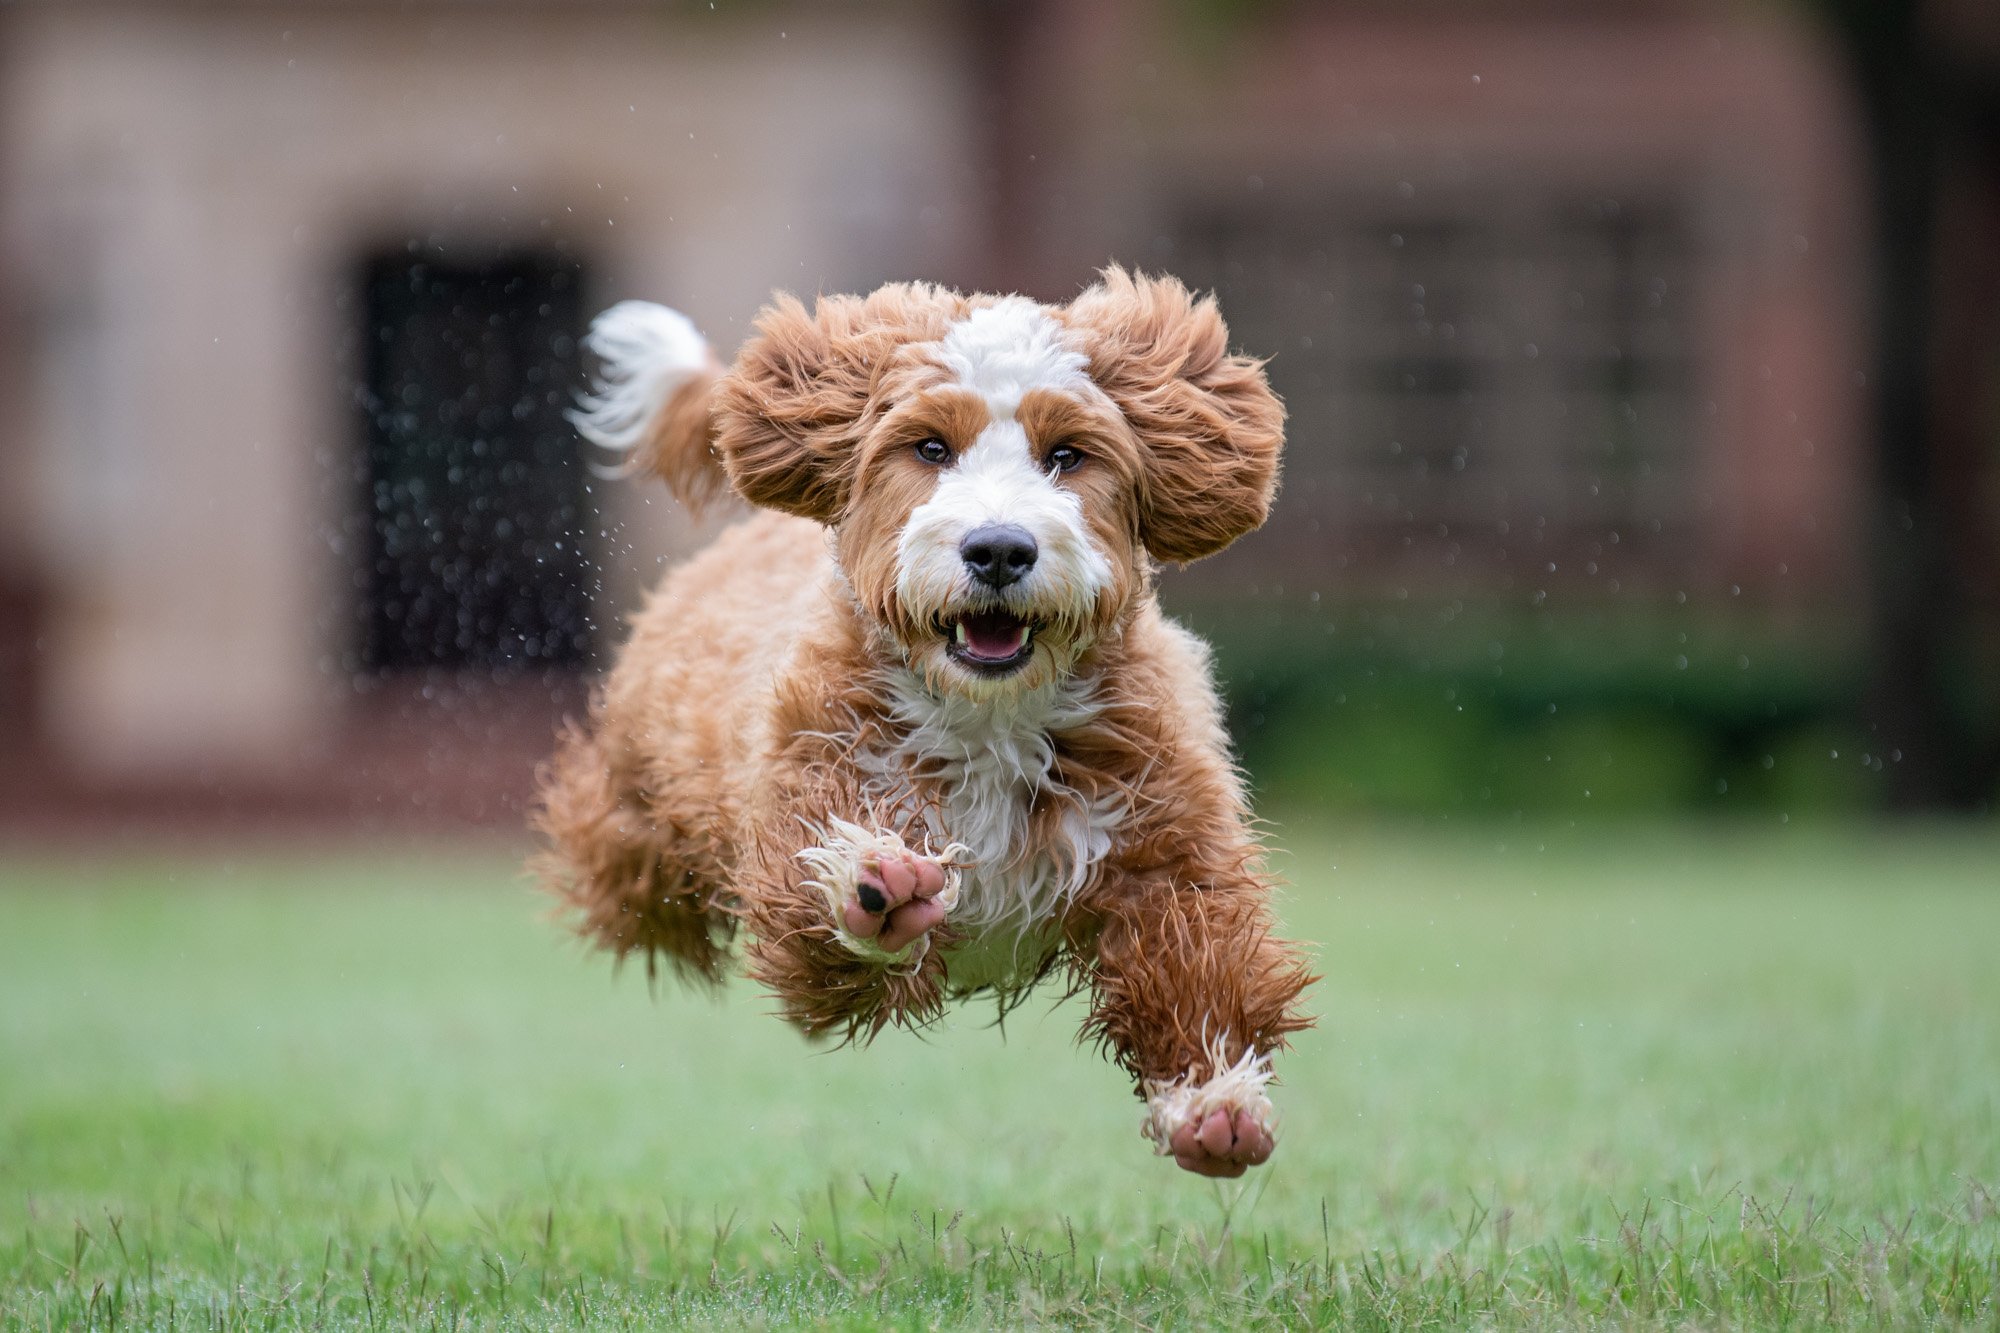 dog leaping while running with toe beans showing